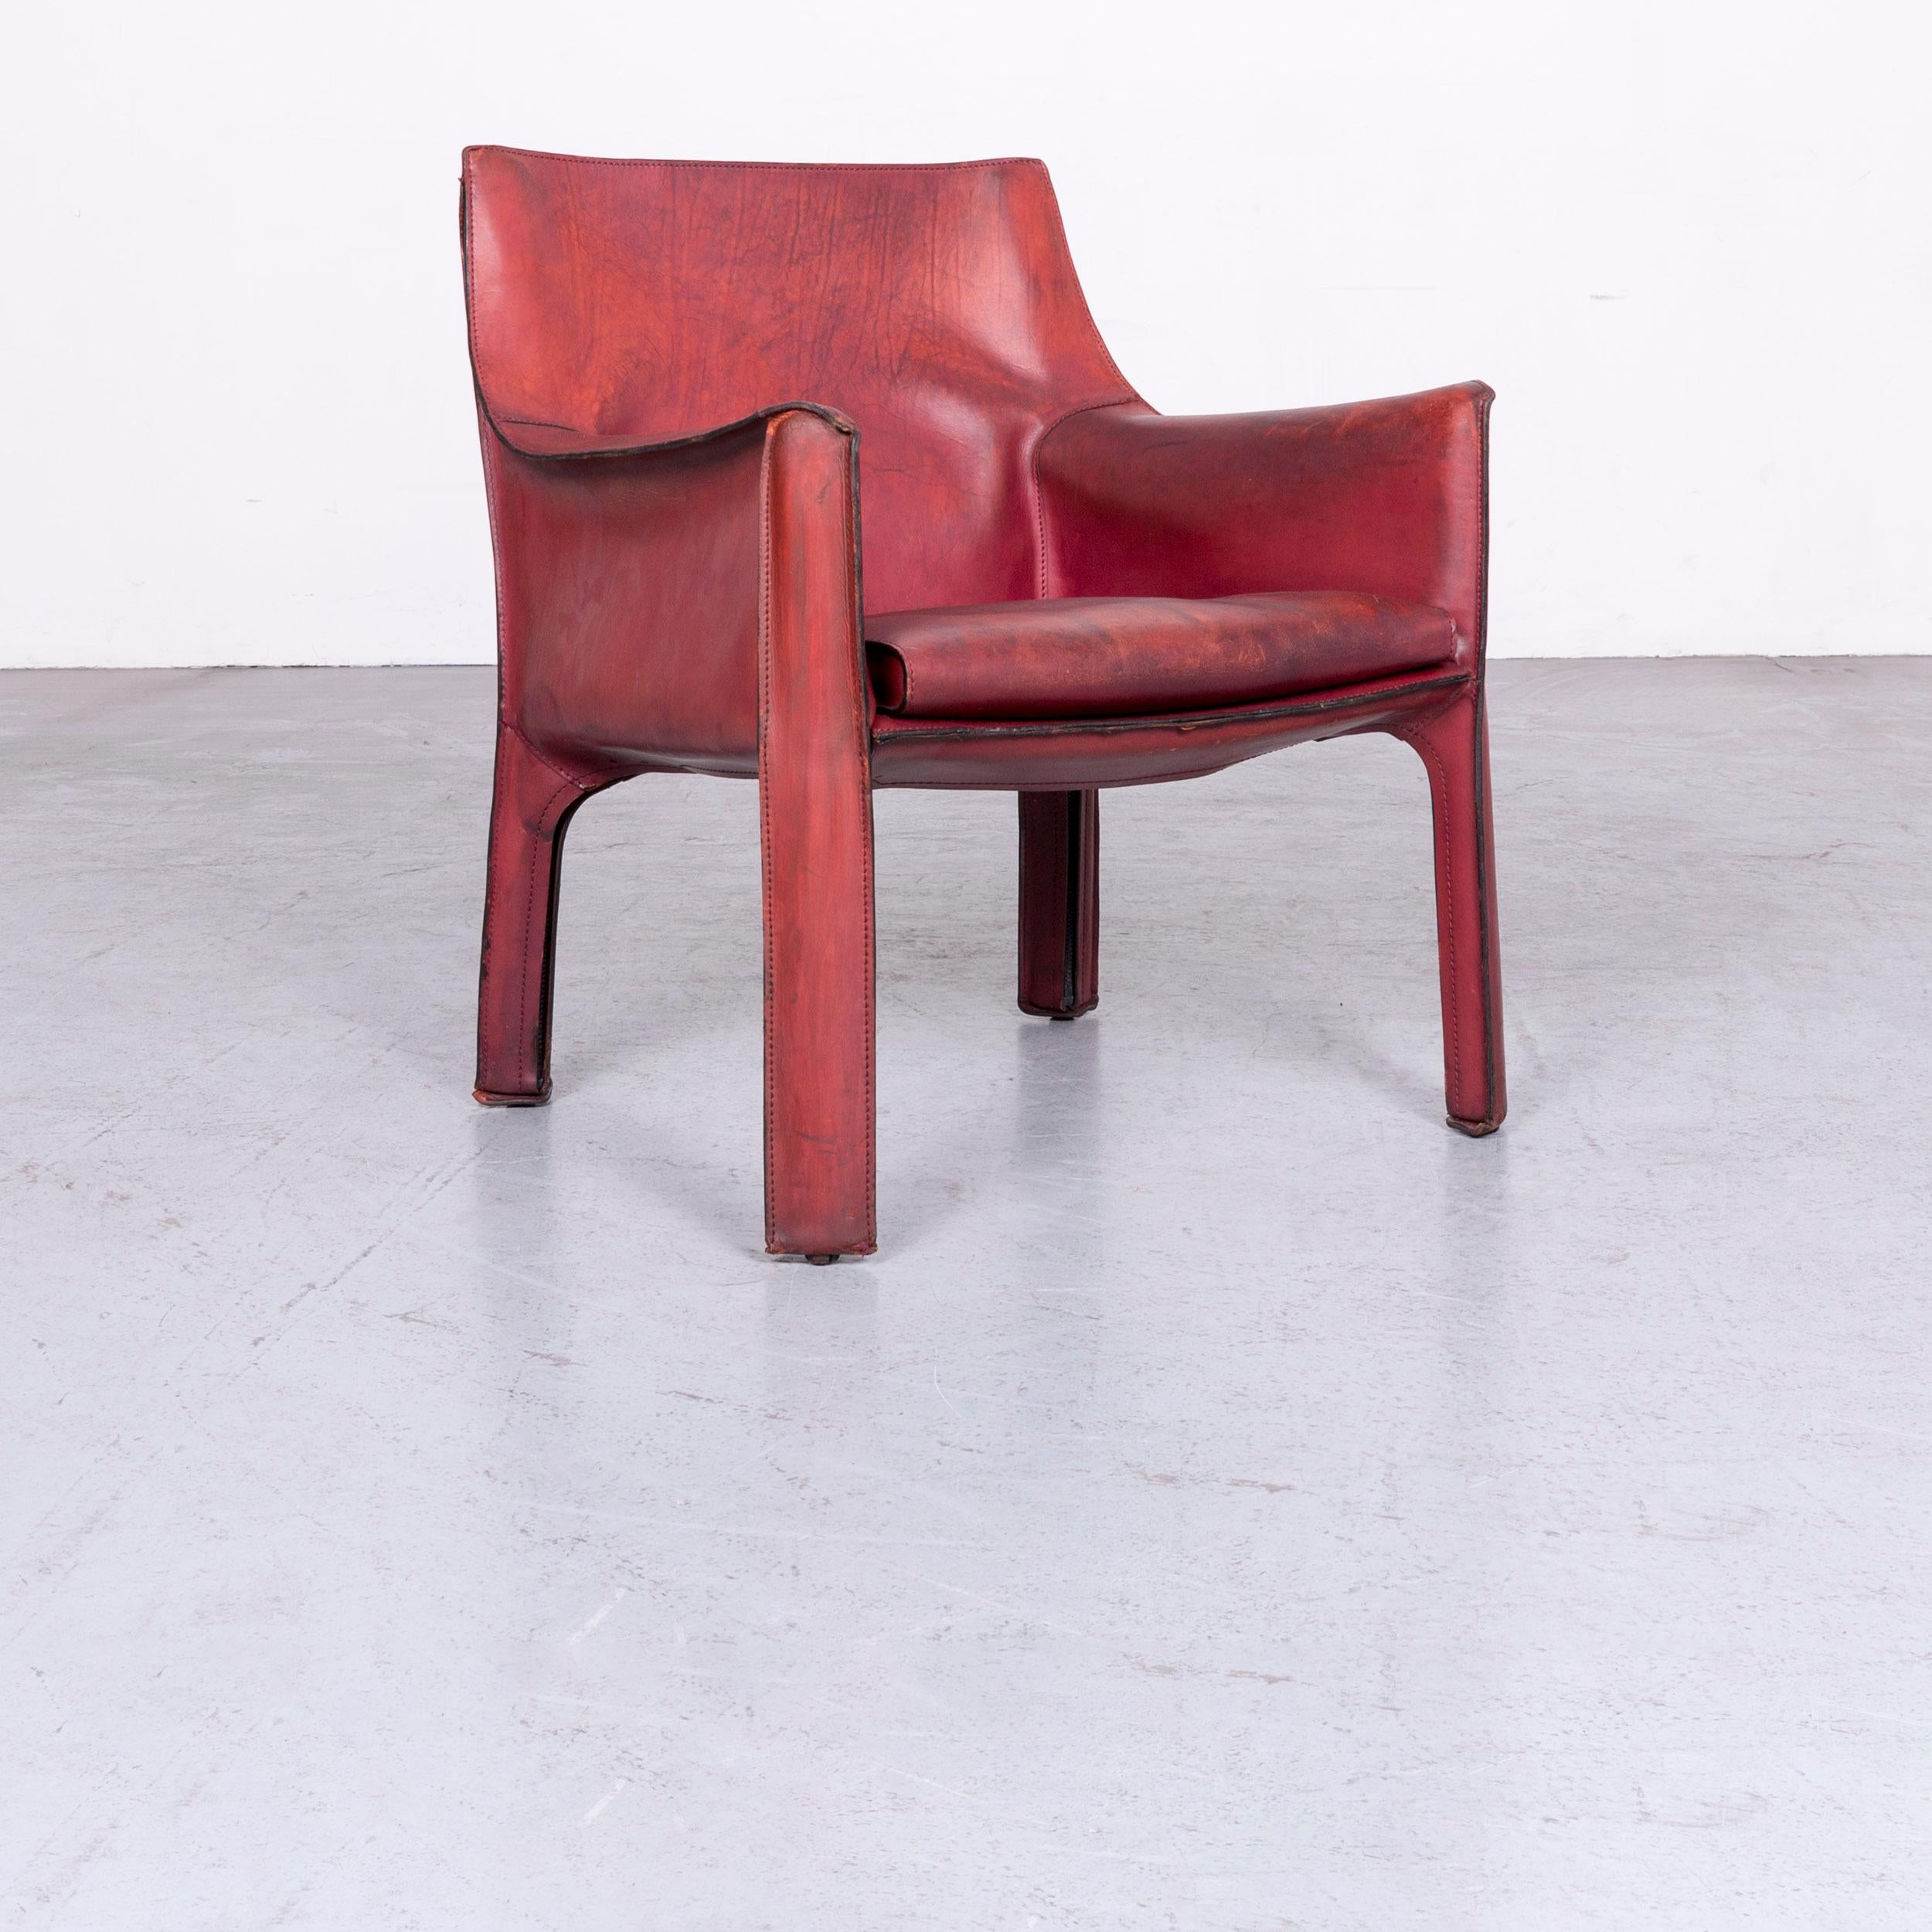 We bring to you a cassina cab 414 vintage leather armchair red by Mario Belinni 1970-1979.